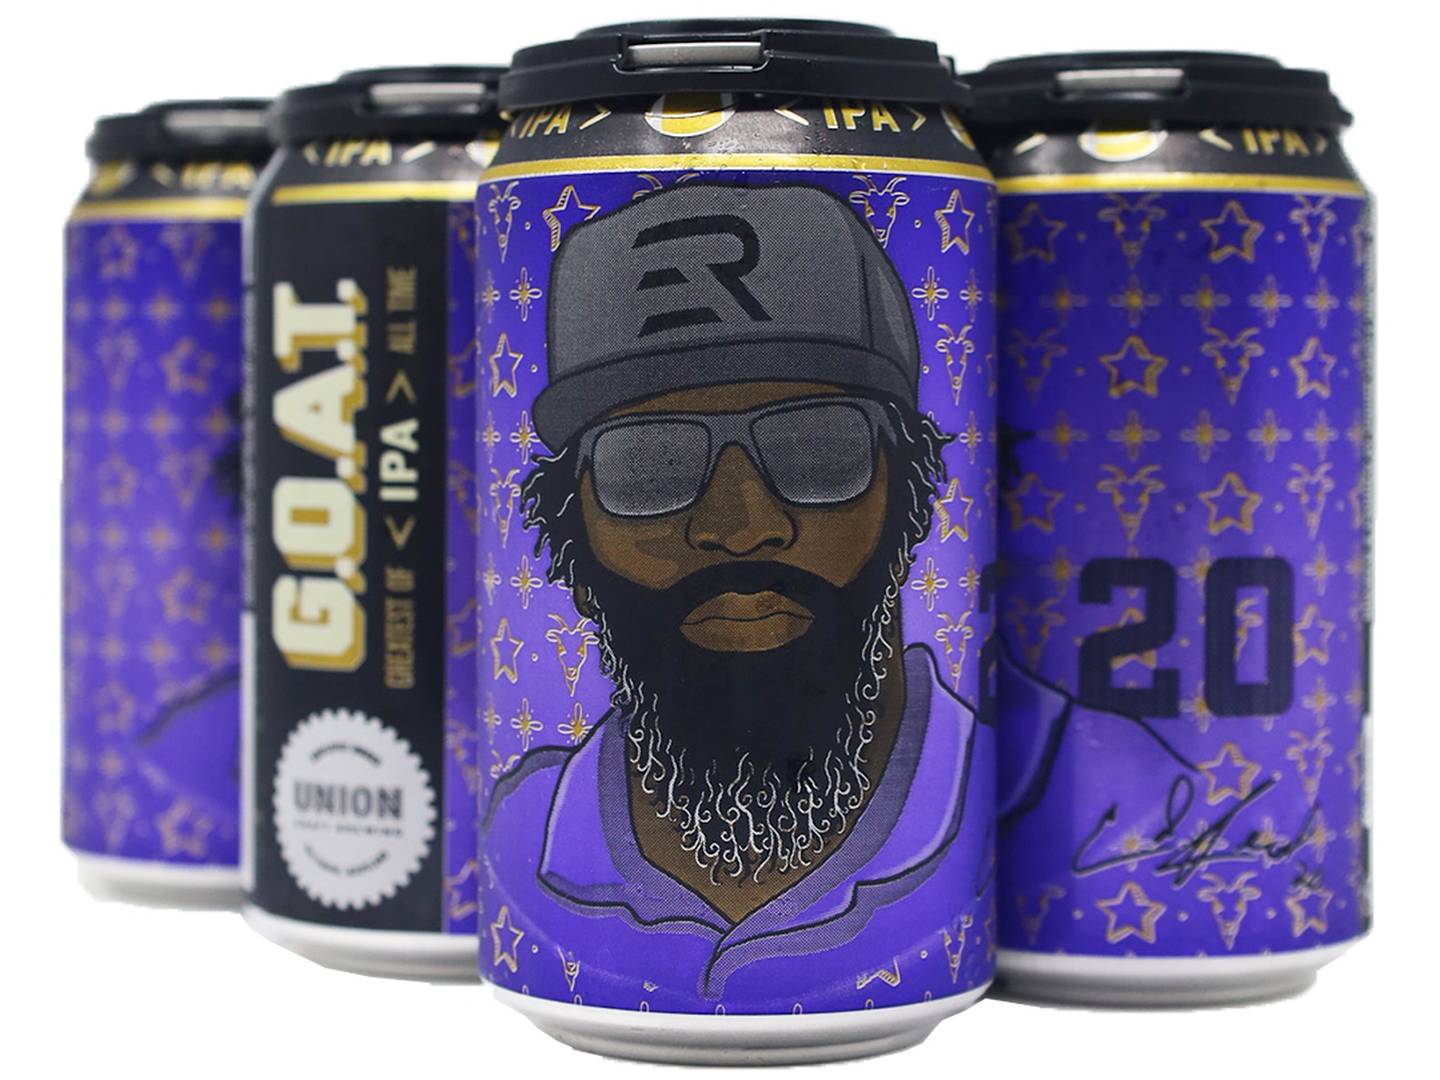 Baltimore's UNION Craft Brewing released “G.O.A.T. IPA” in honor of Ravens Hall of Fame safety Ed Reed. Handout photo courtesy of Union Craft Brewing.